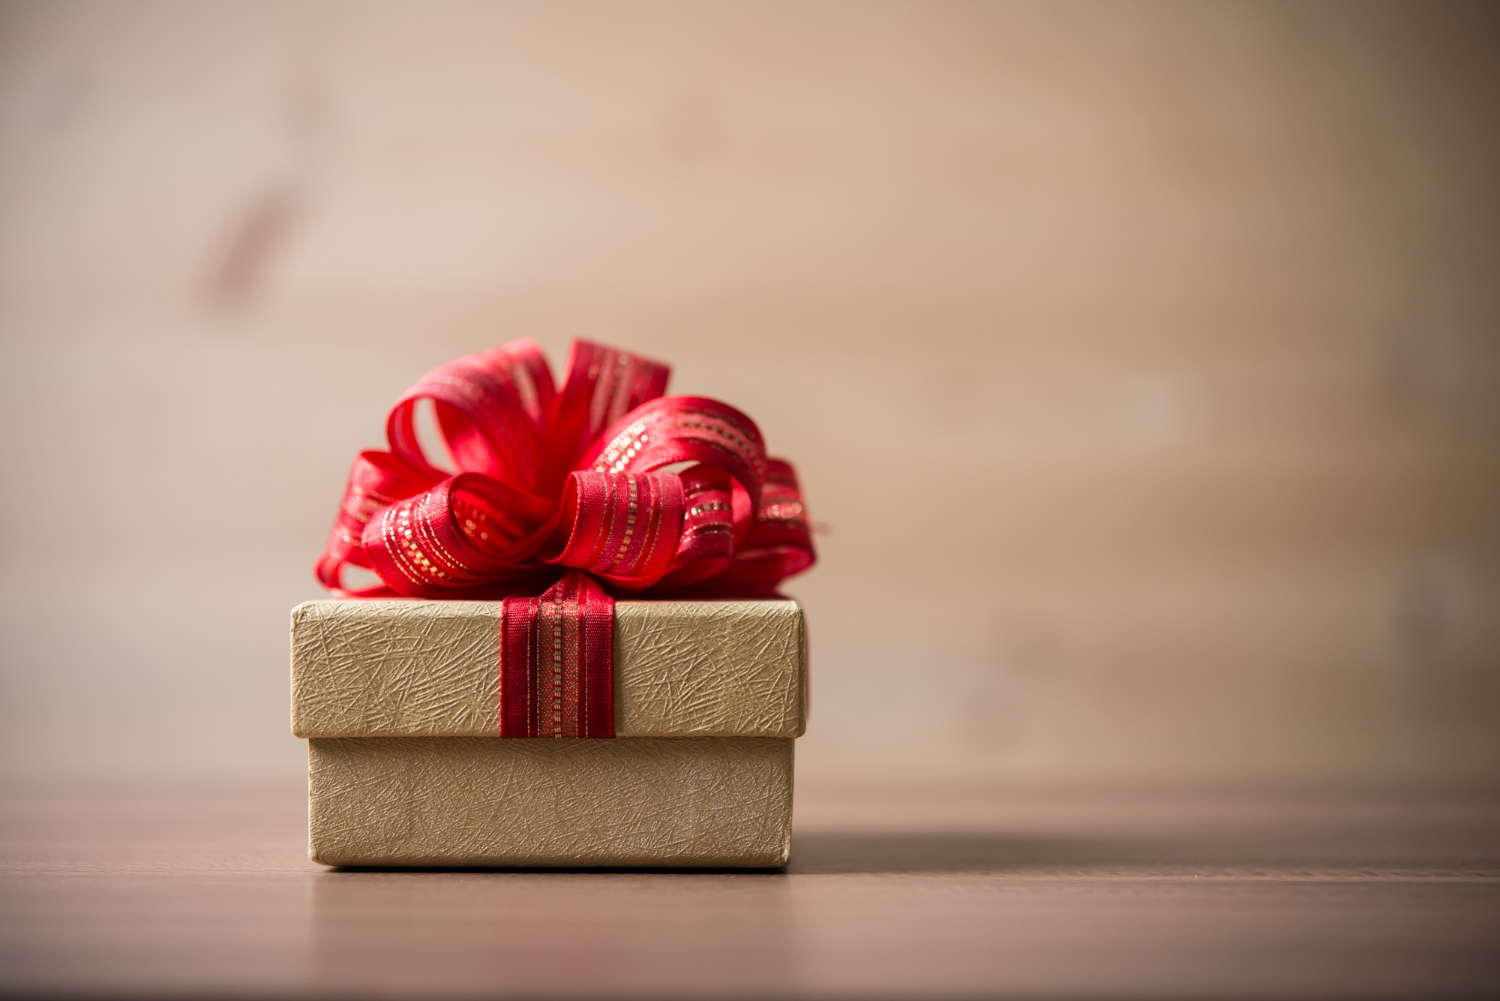 Send Gifts Online To Find The Perfect Gifts Every Time